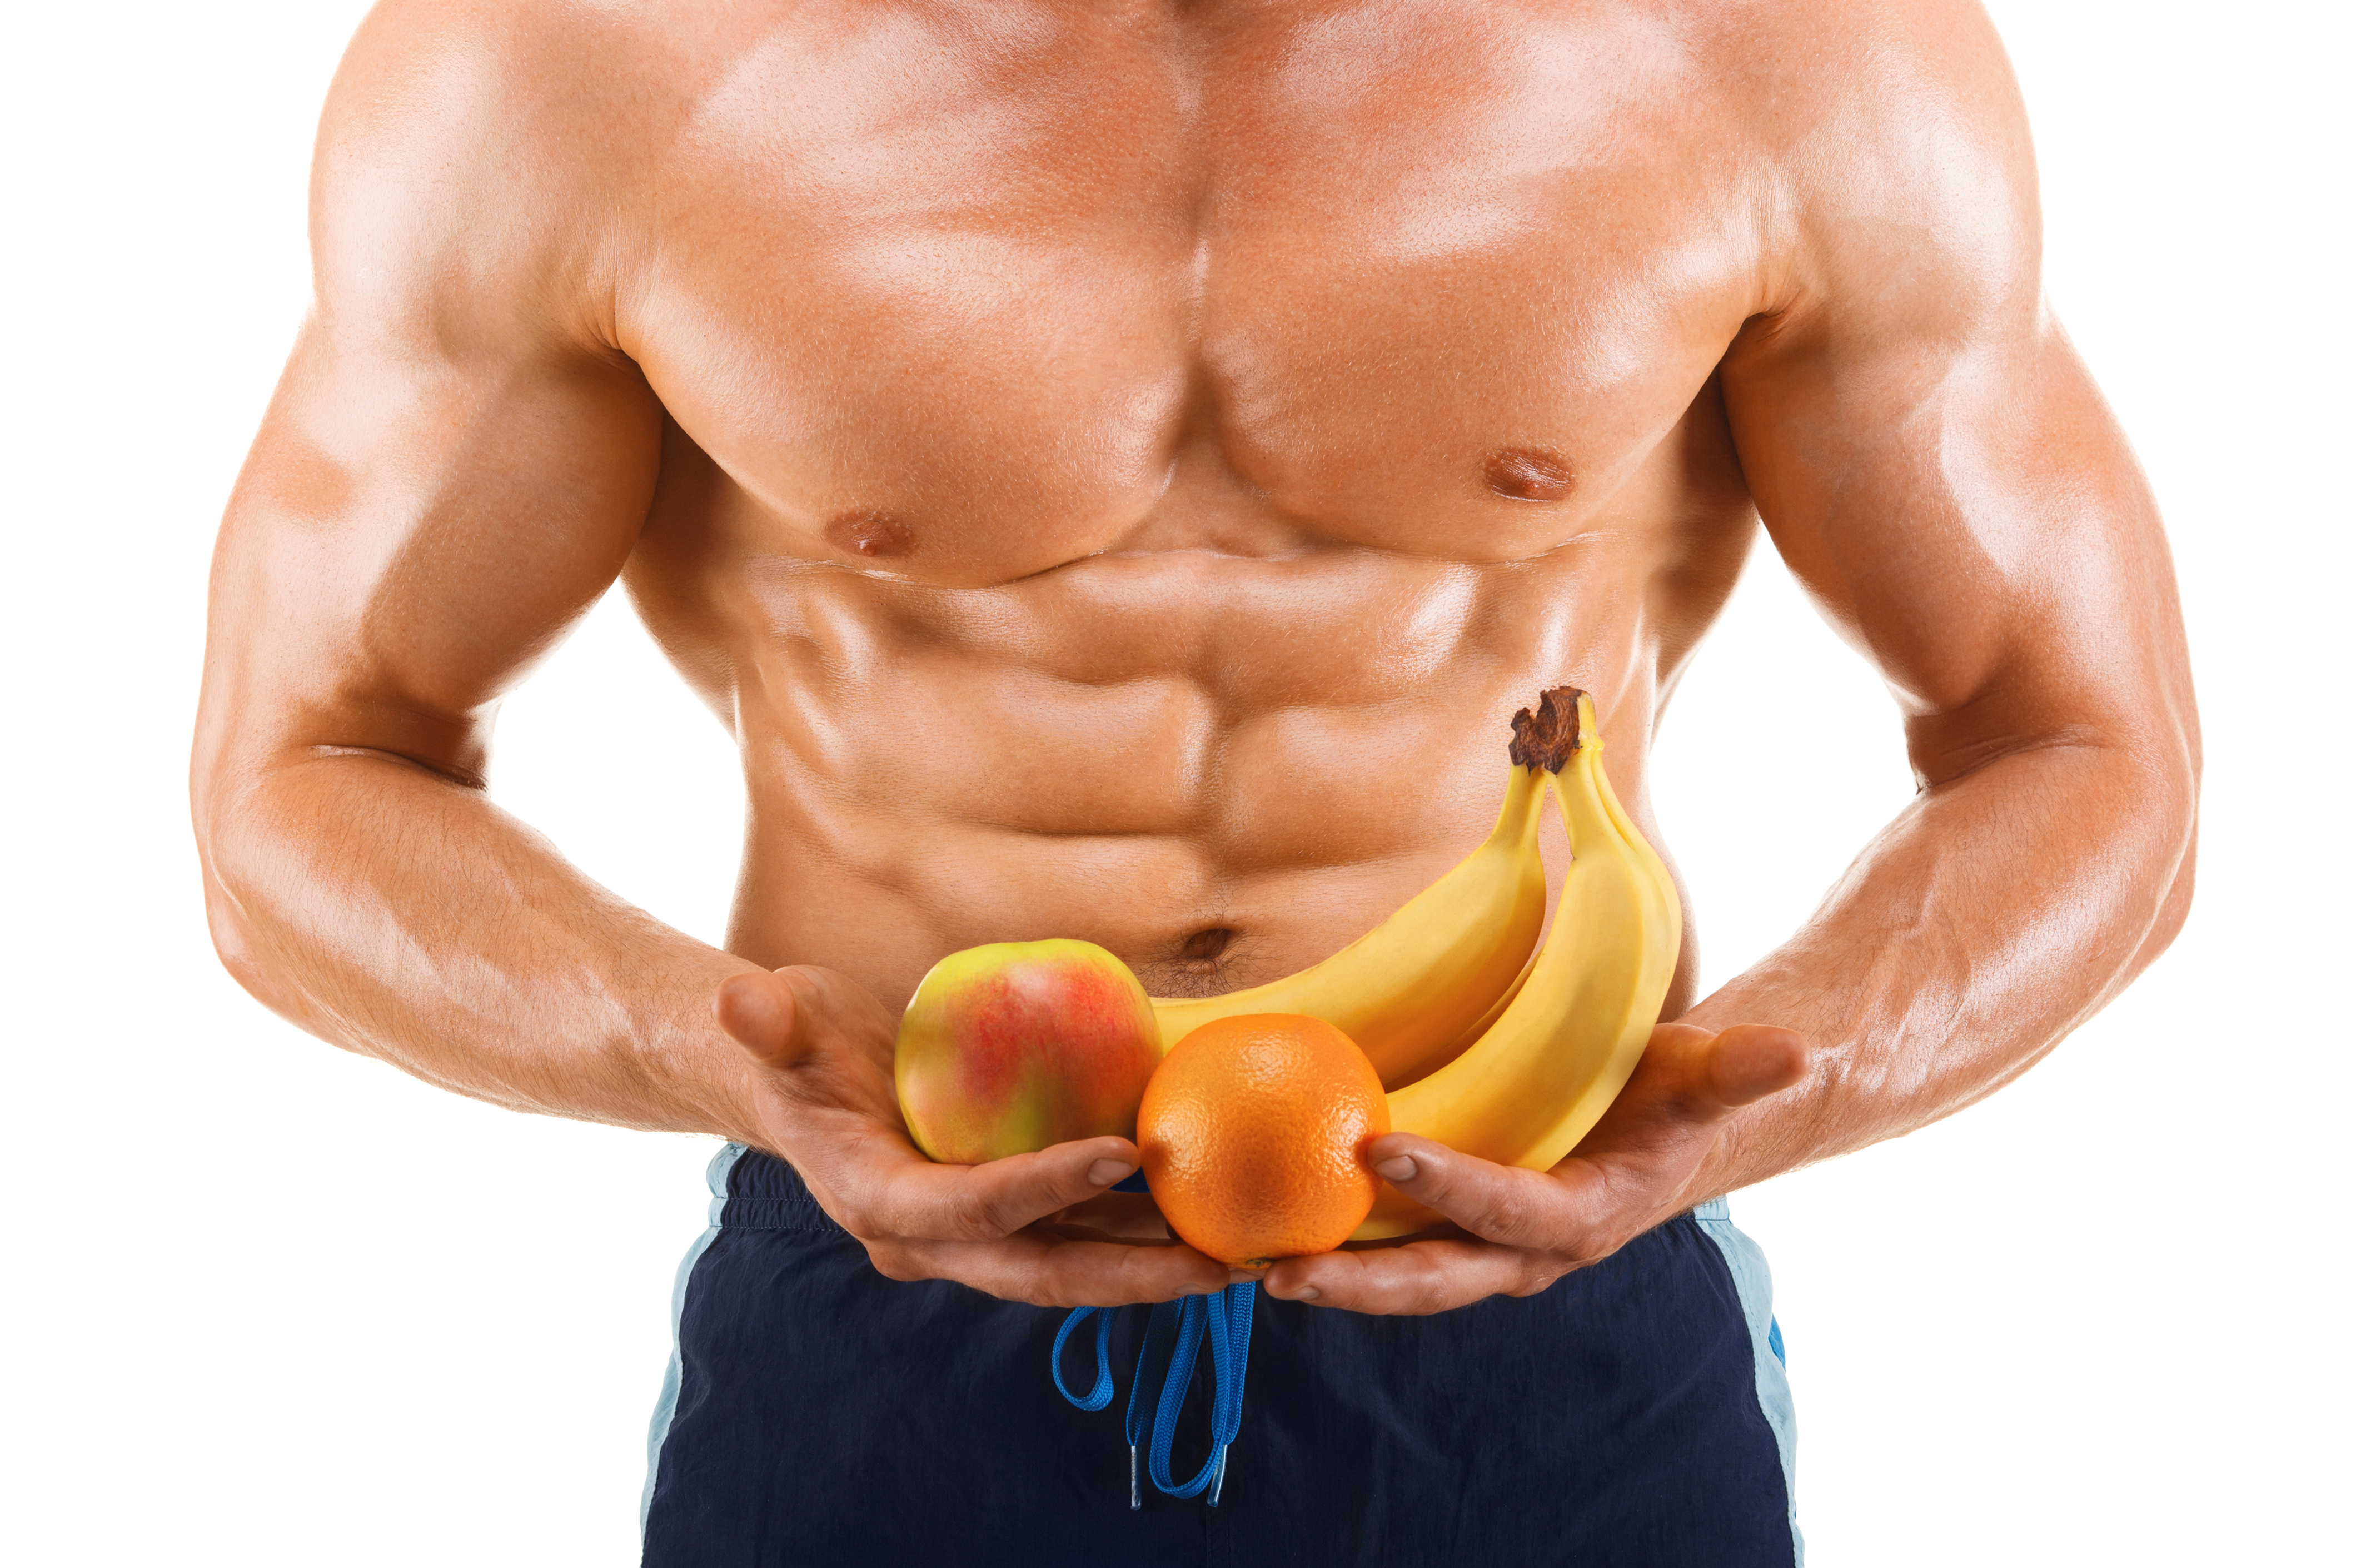 bodybuilding, carbohydrates, supplements